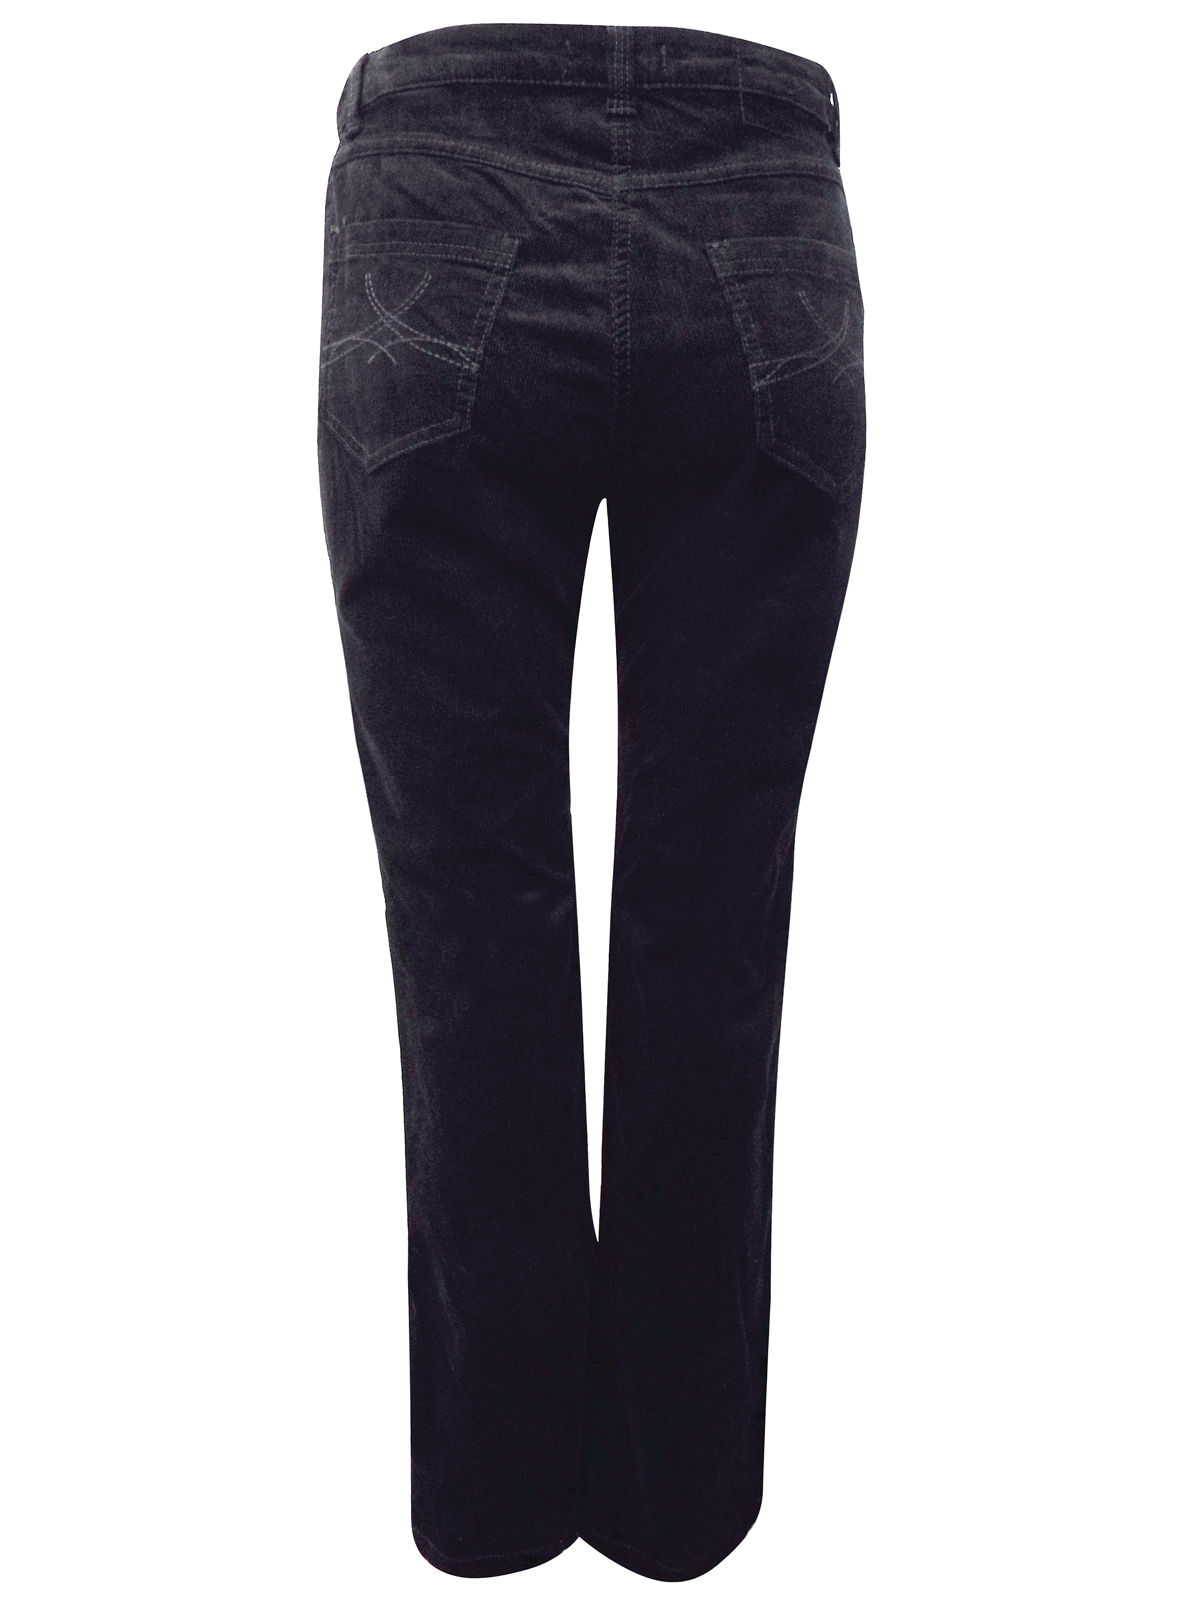 Marks and Spencer - - M&5 BLACK Cotton Rich Bootleg Corduroy Trousers ...